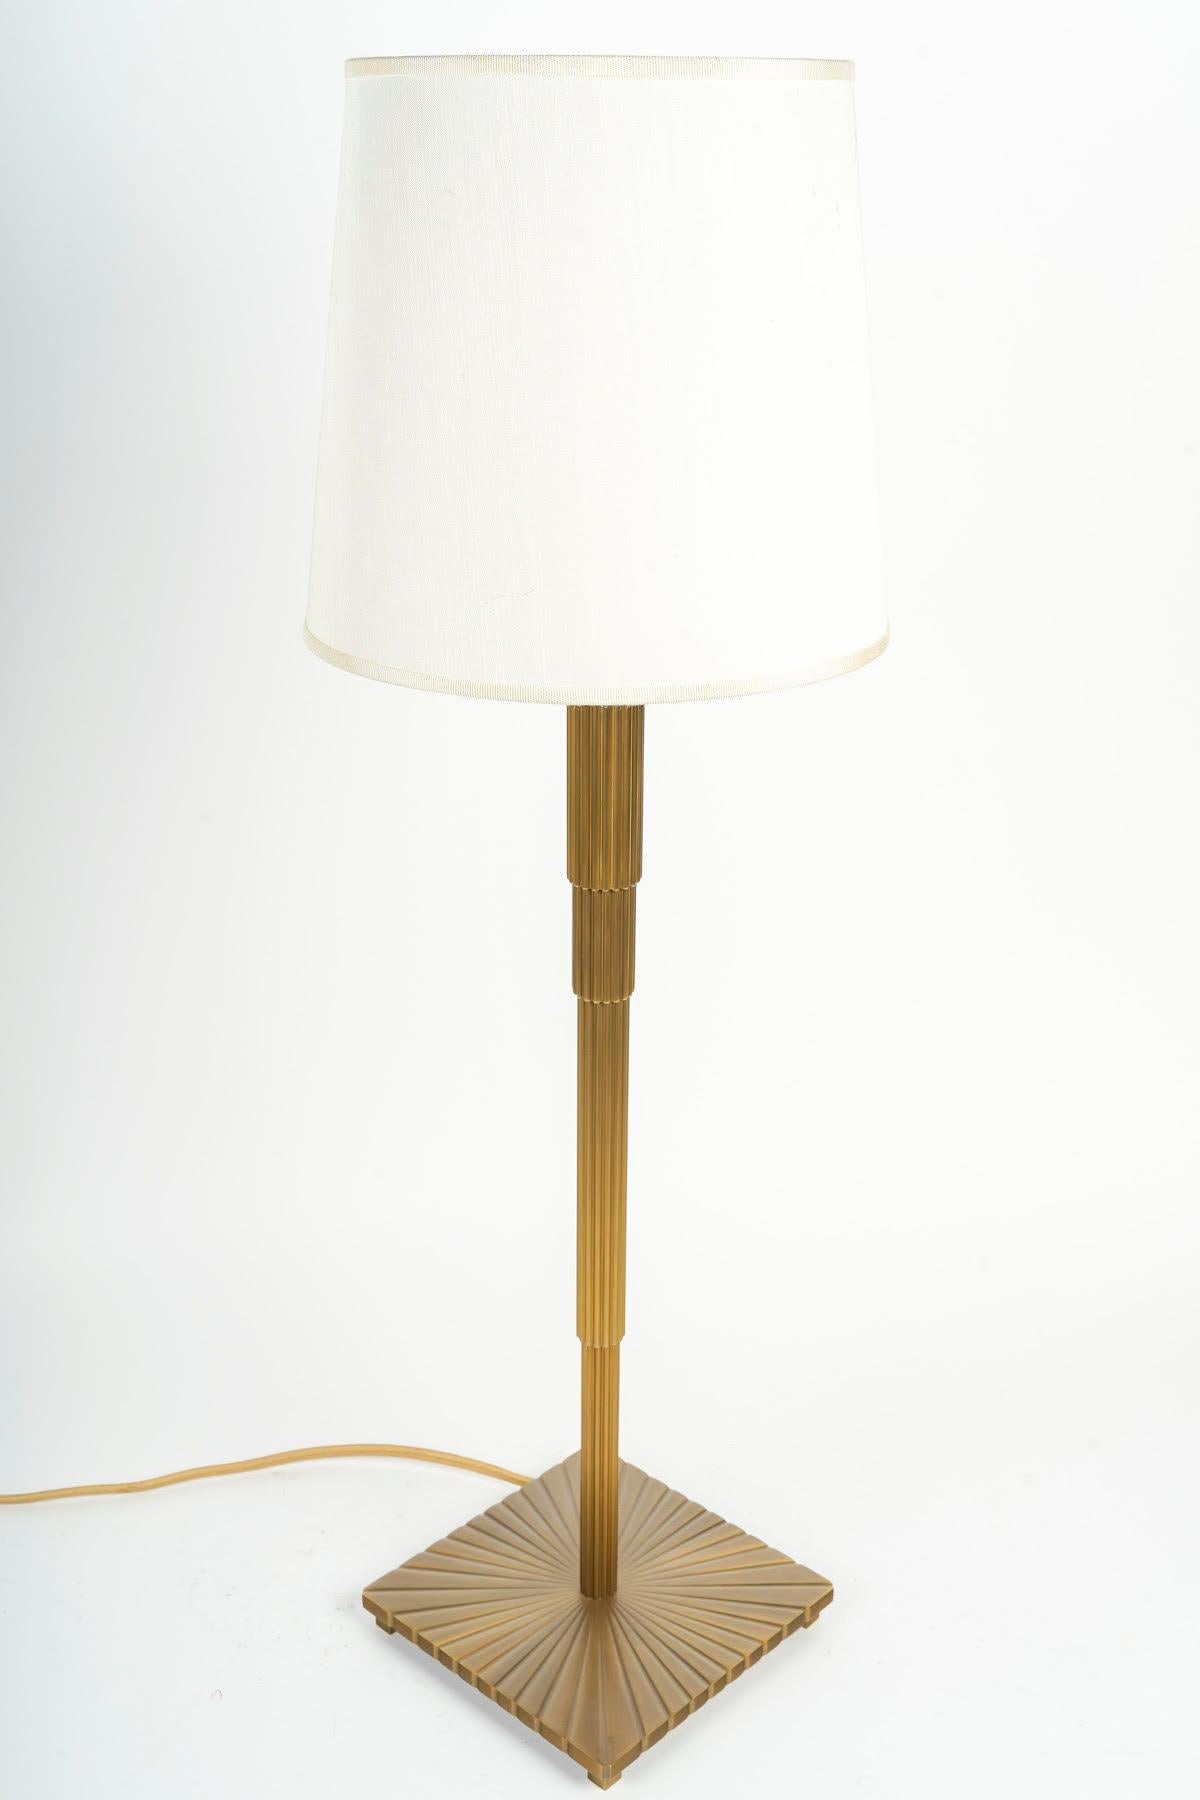 20th Century Gilt Bronze Table Lamps with Fluted Section and Square Base, Art Deco Style. For Sale